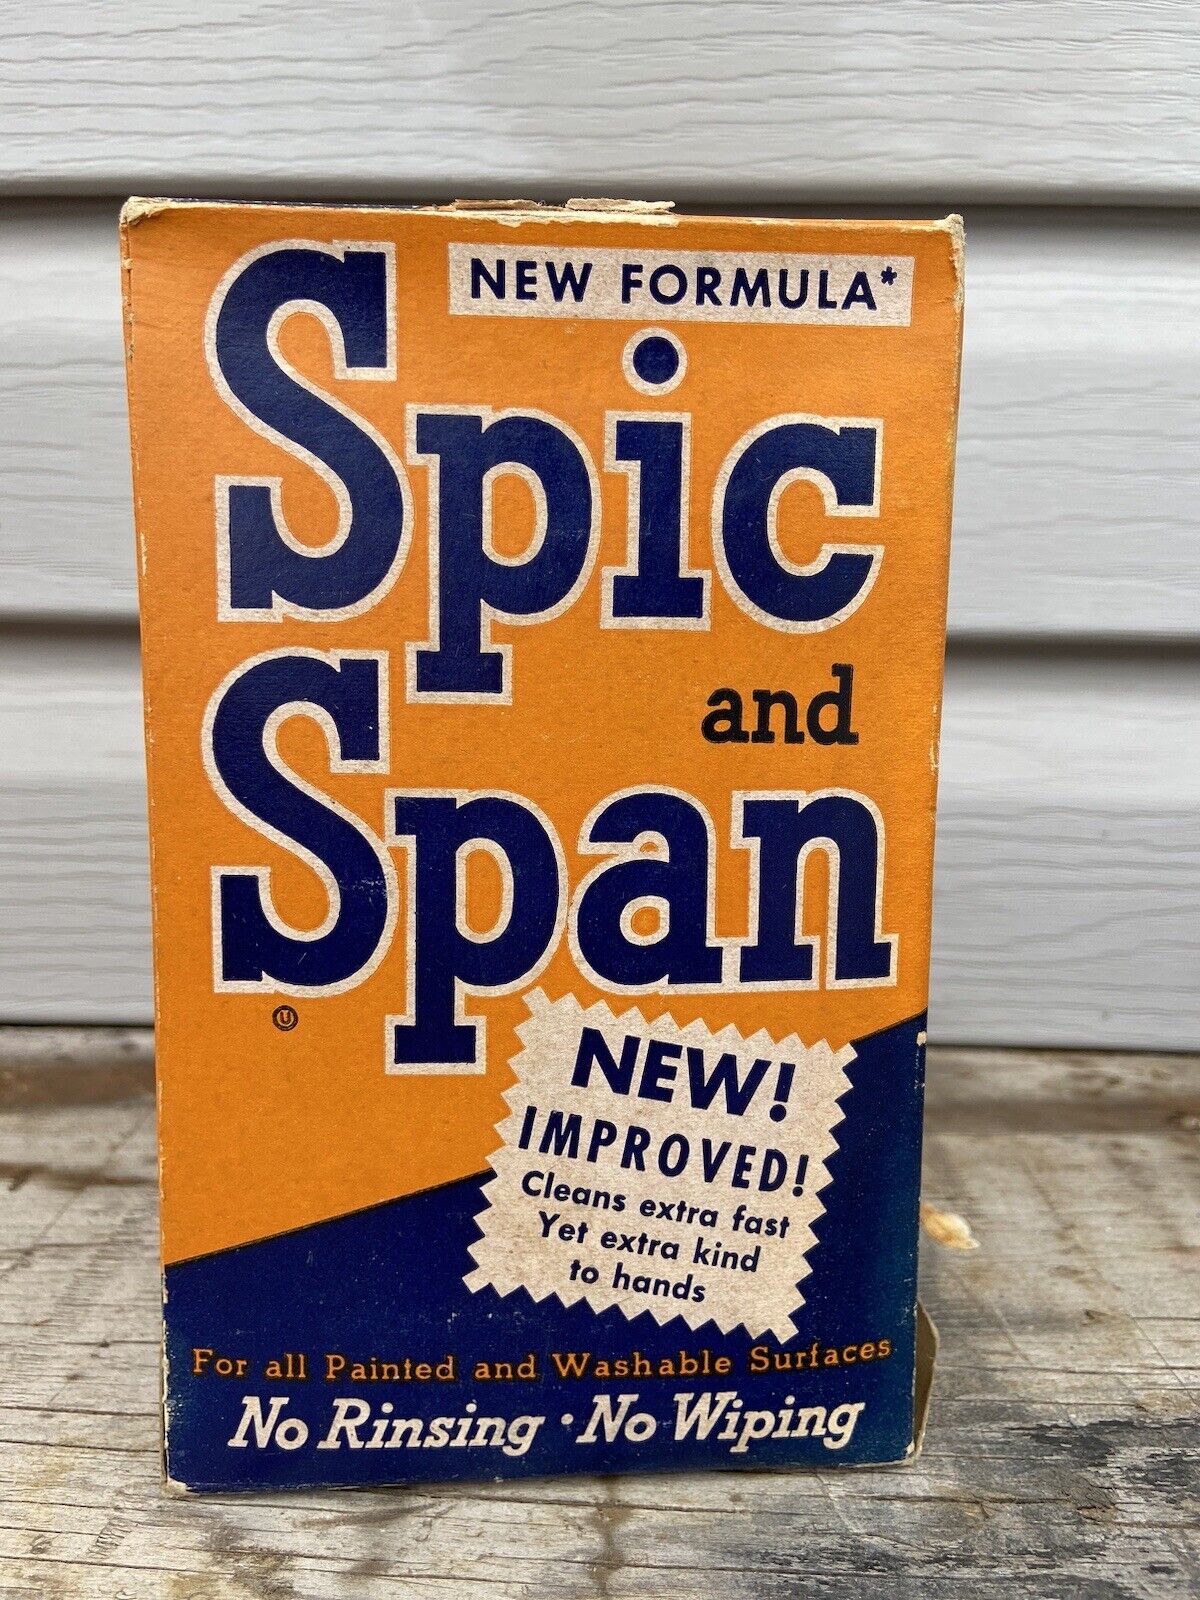 Vintage SPIC AND SPAN Powdered Floor Cleaner 1 LB Full Advertising 1950’s